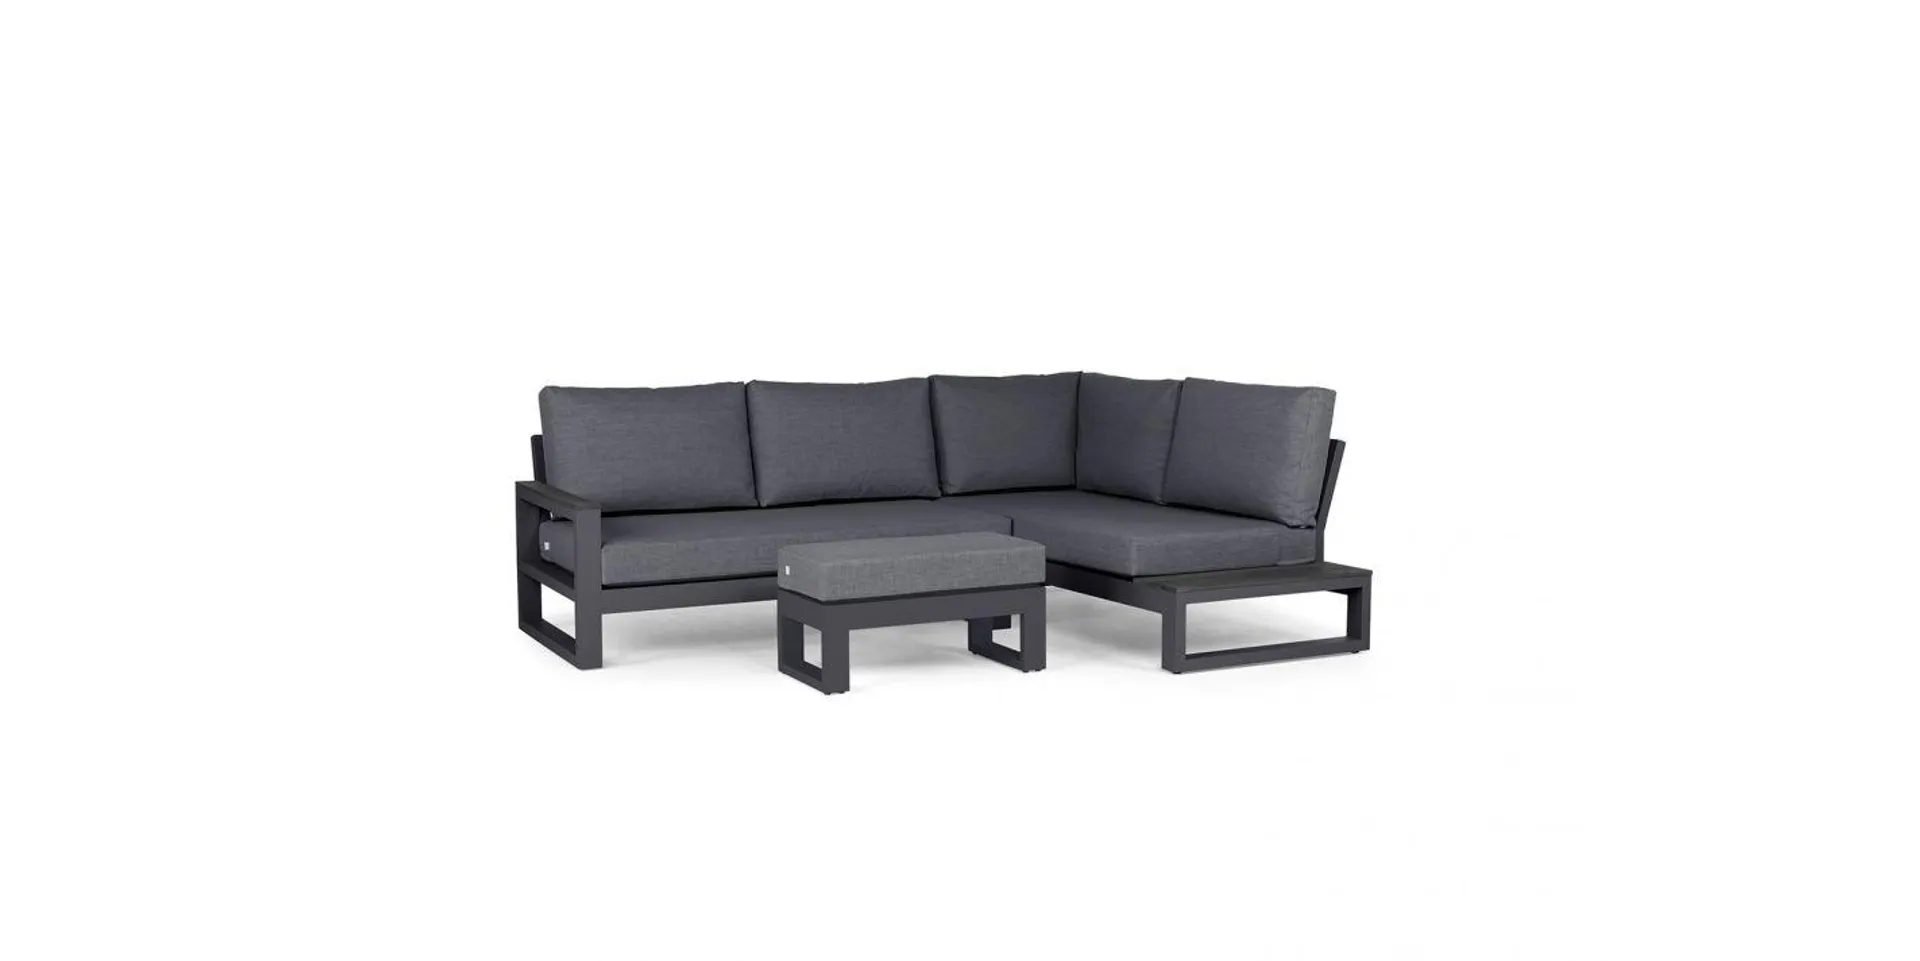 Loungeset Soho 4 personen -Chaise opstelling